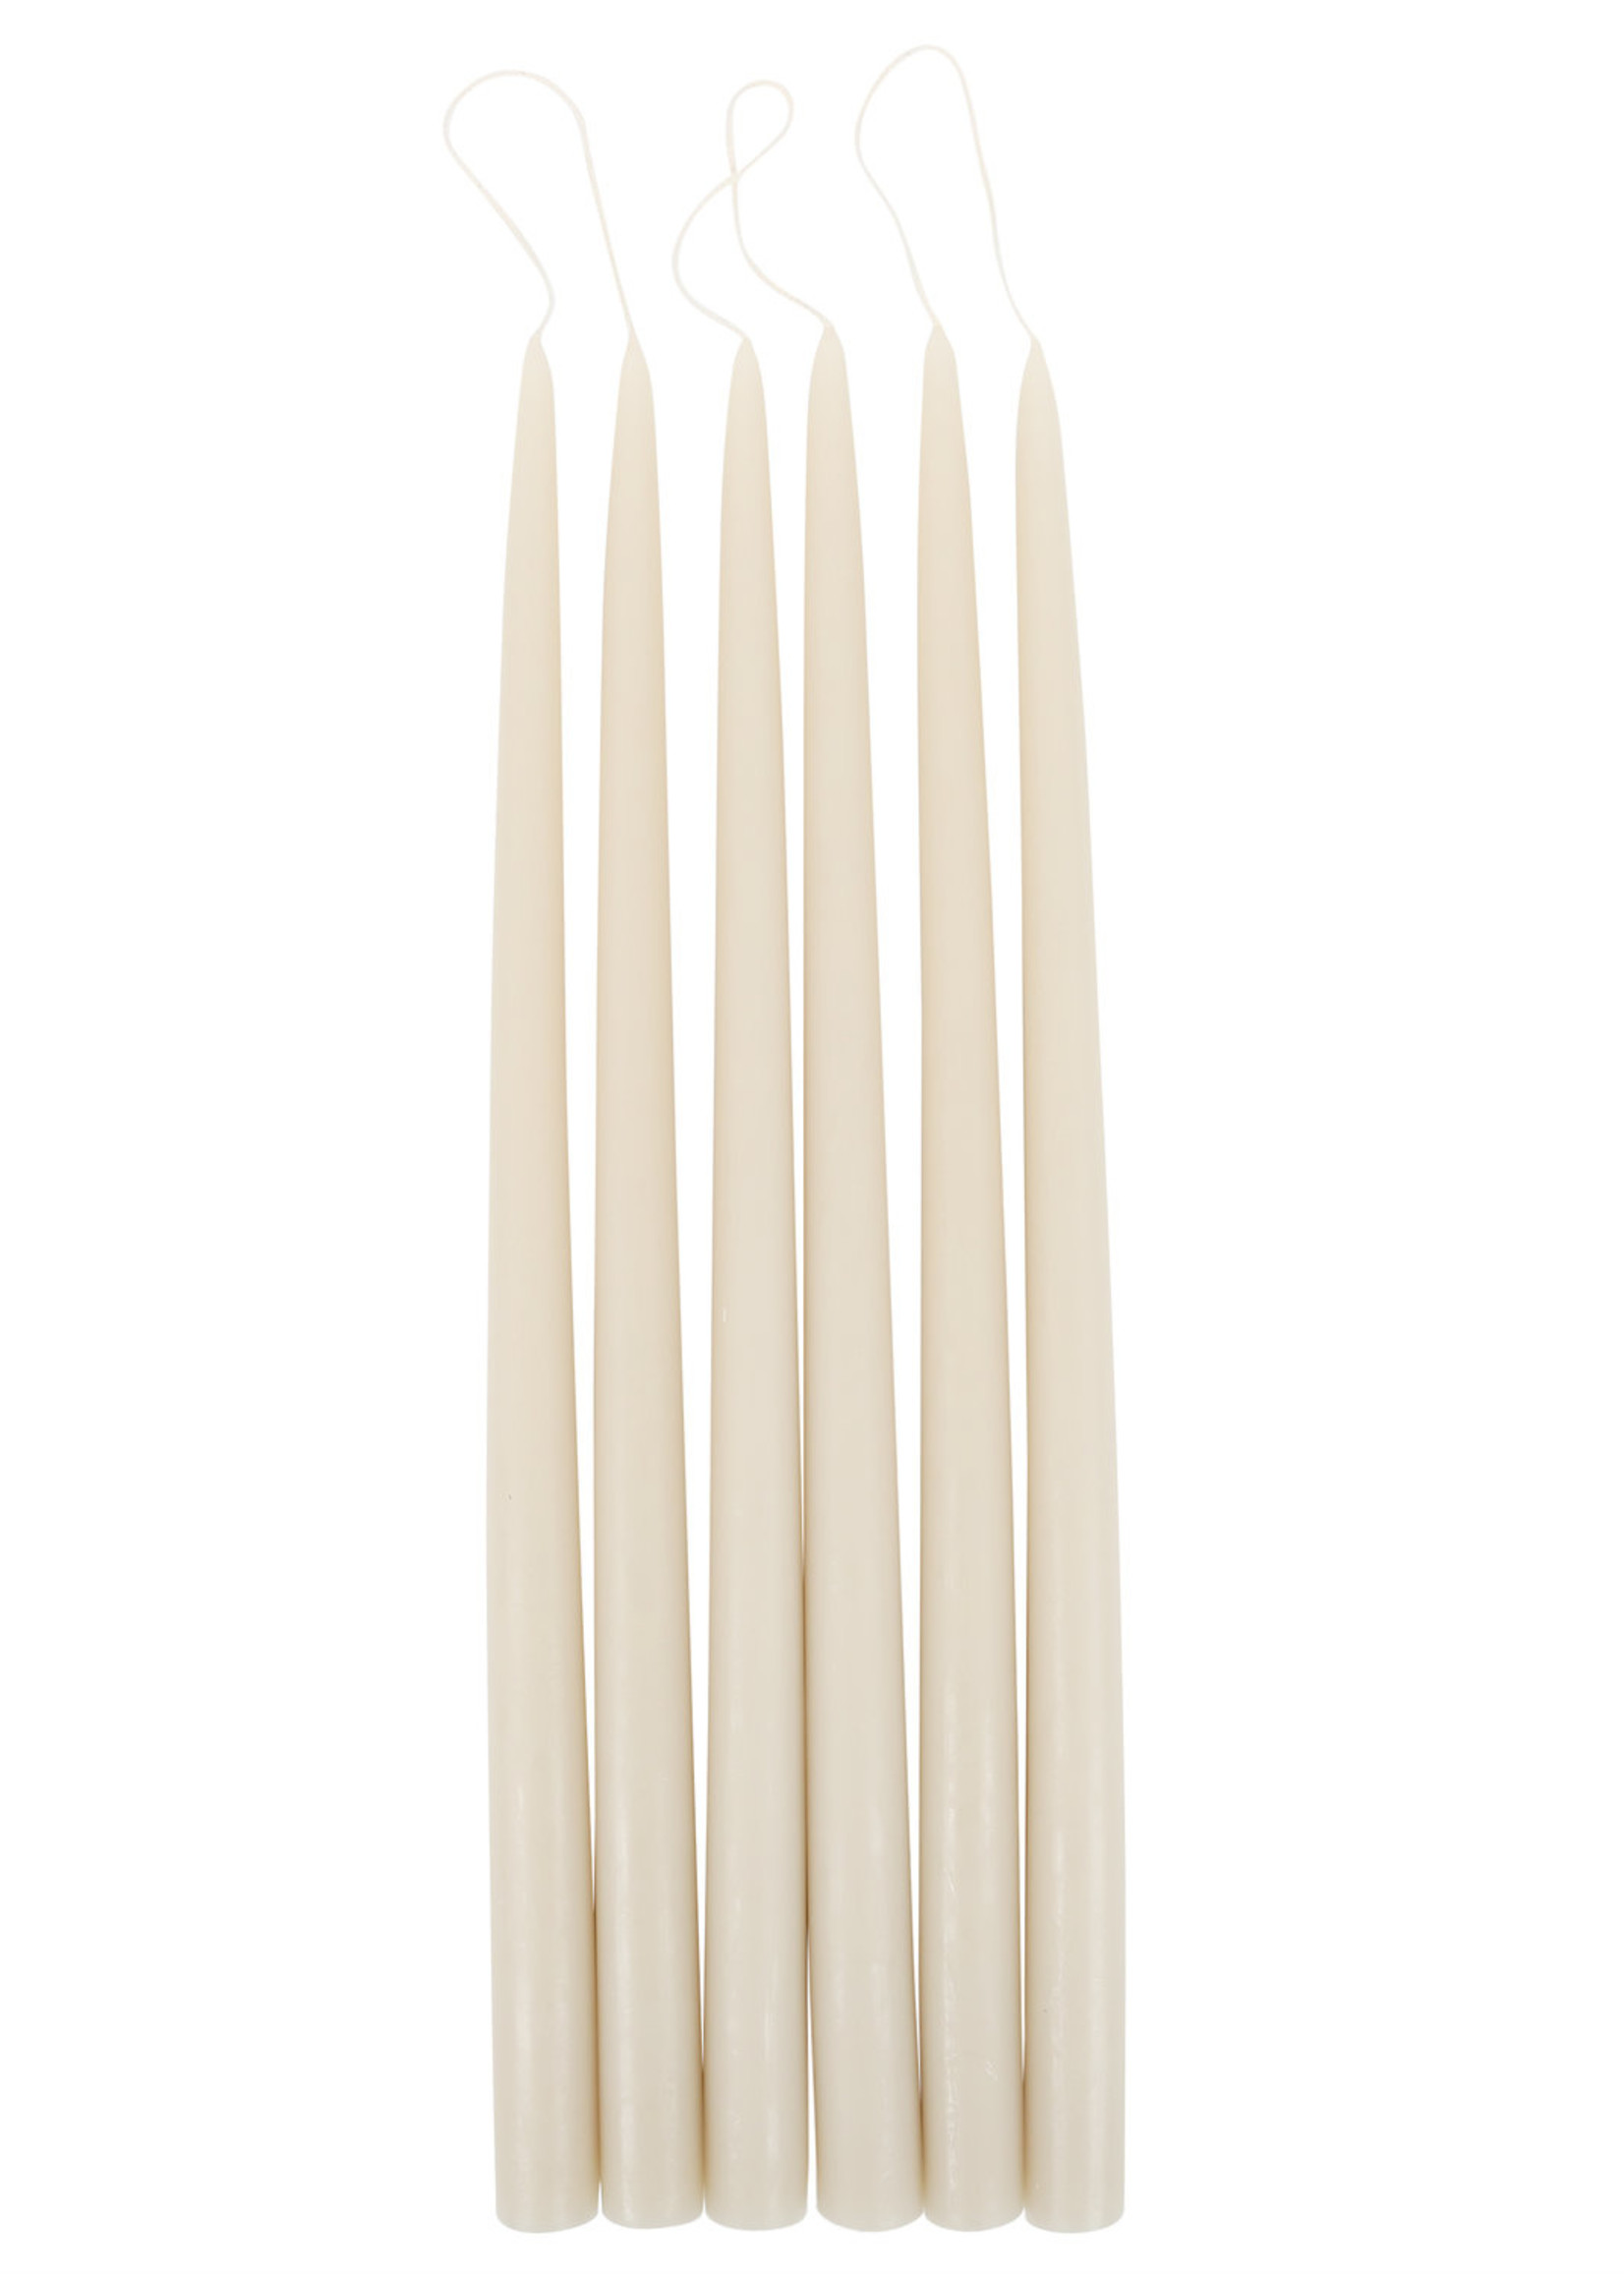 The Floral Society Classic Taper Candles